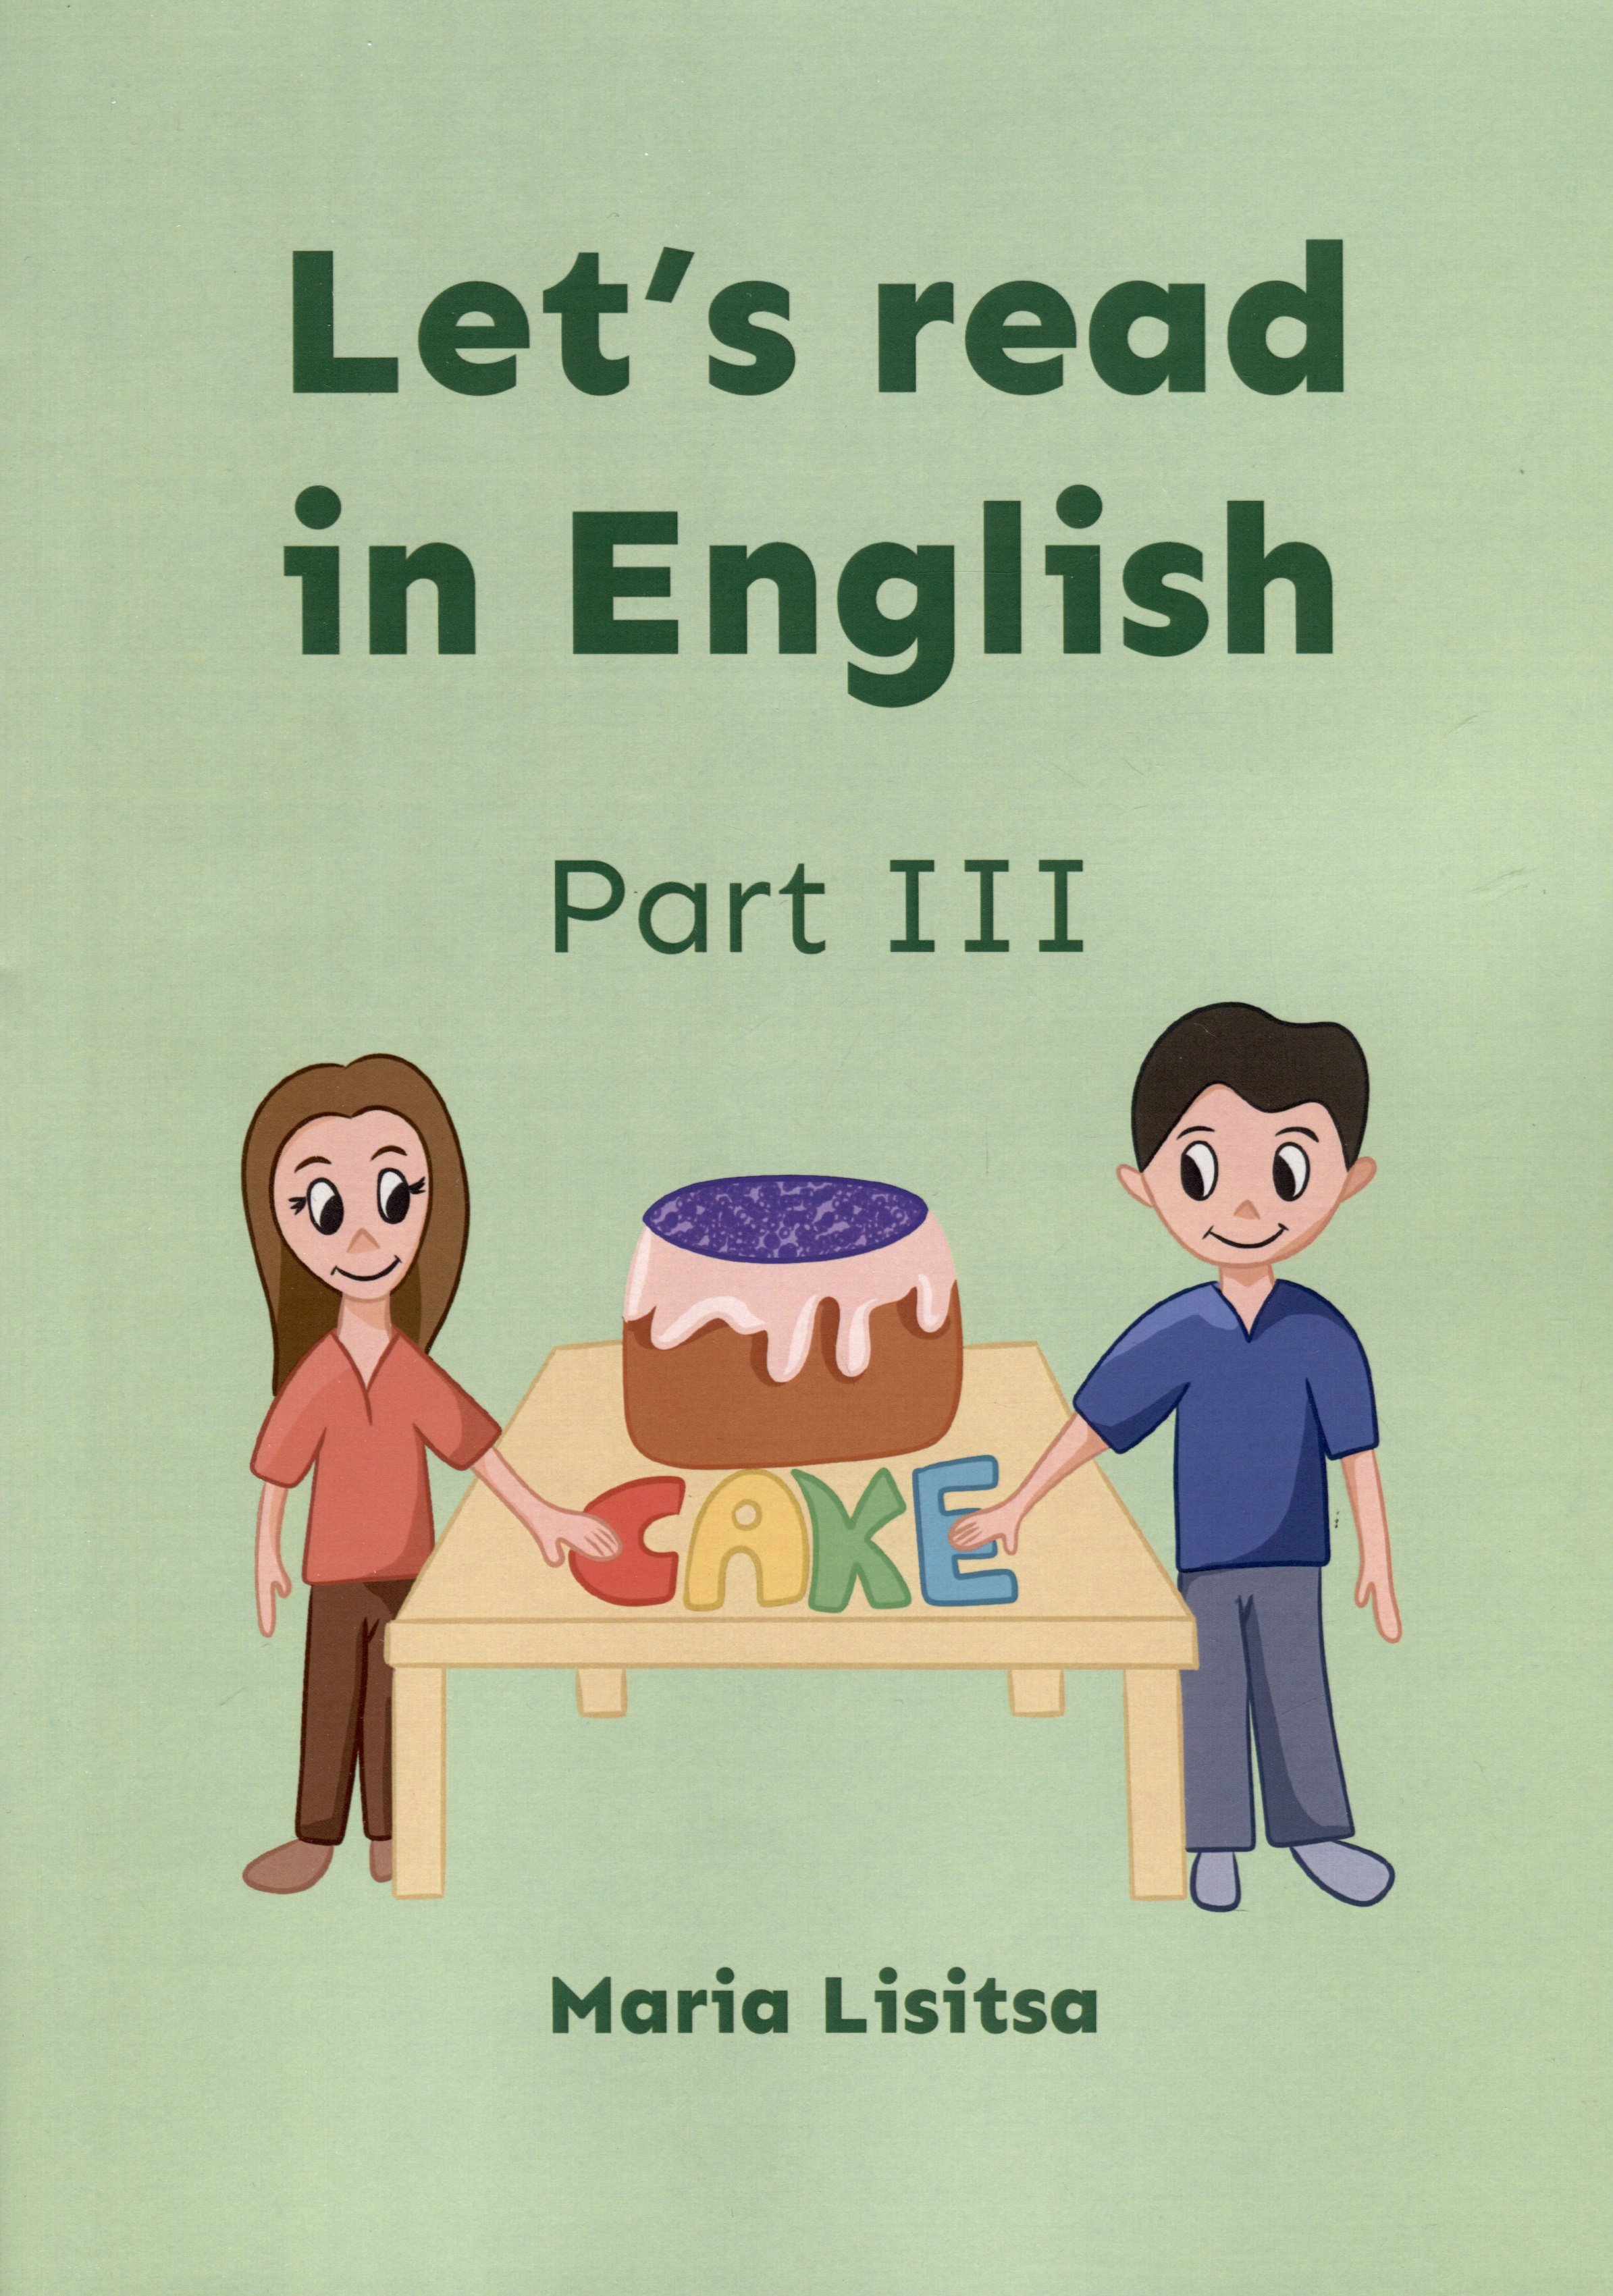 Lets read in English. Part III